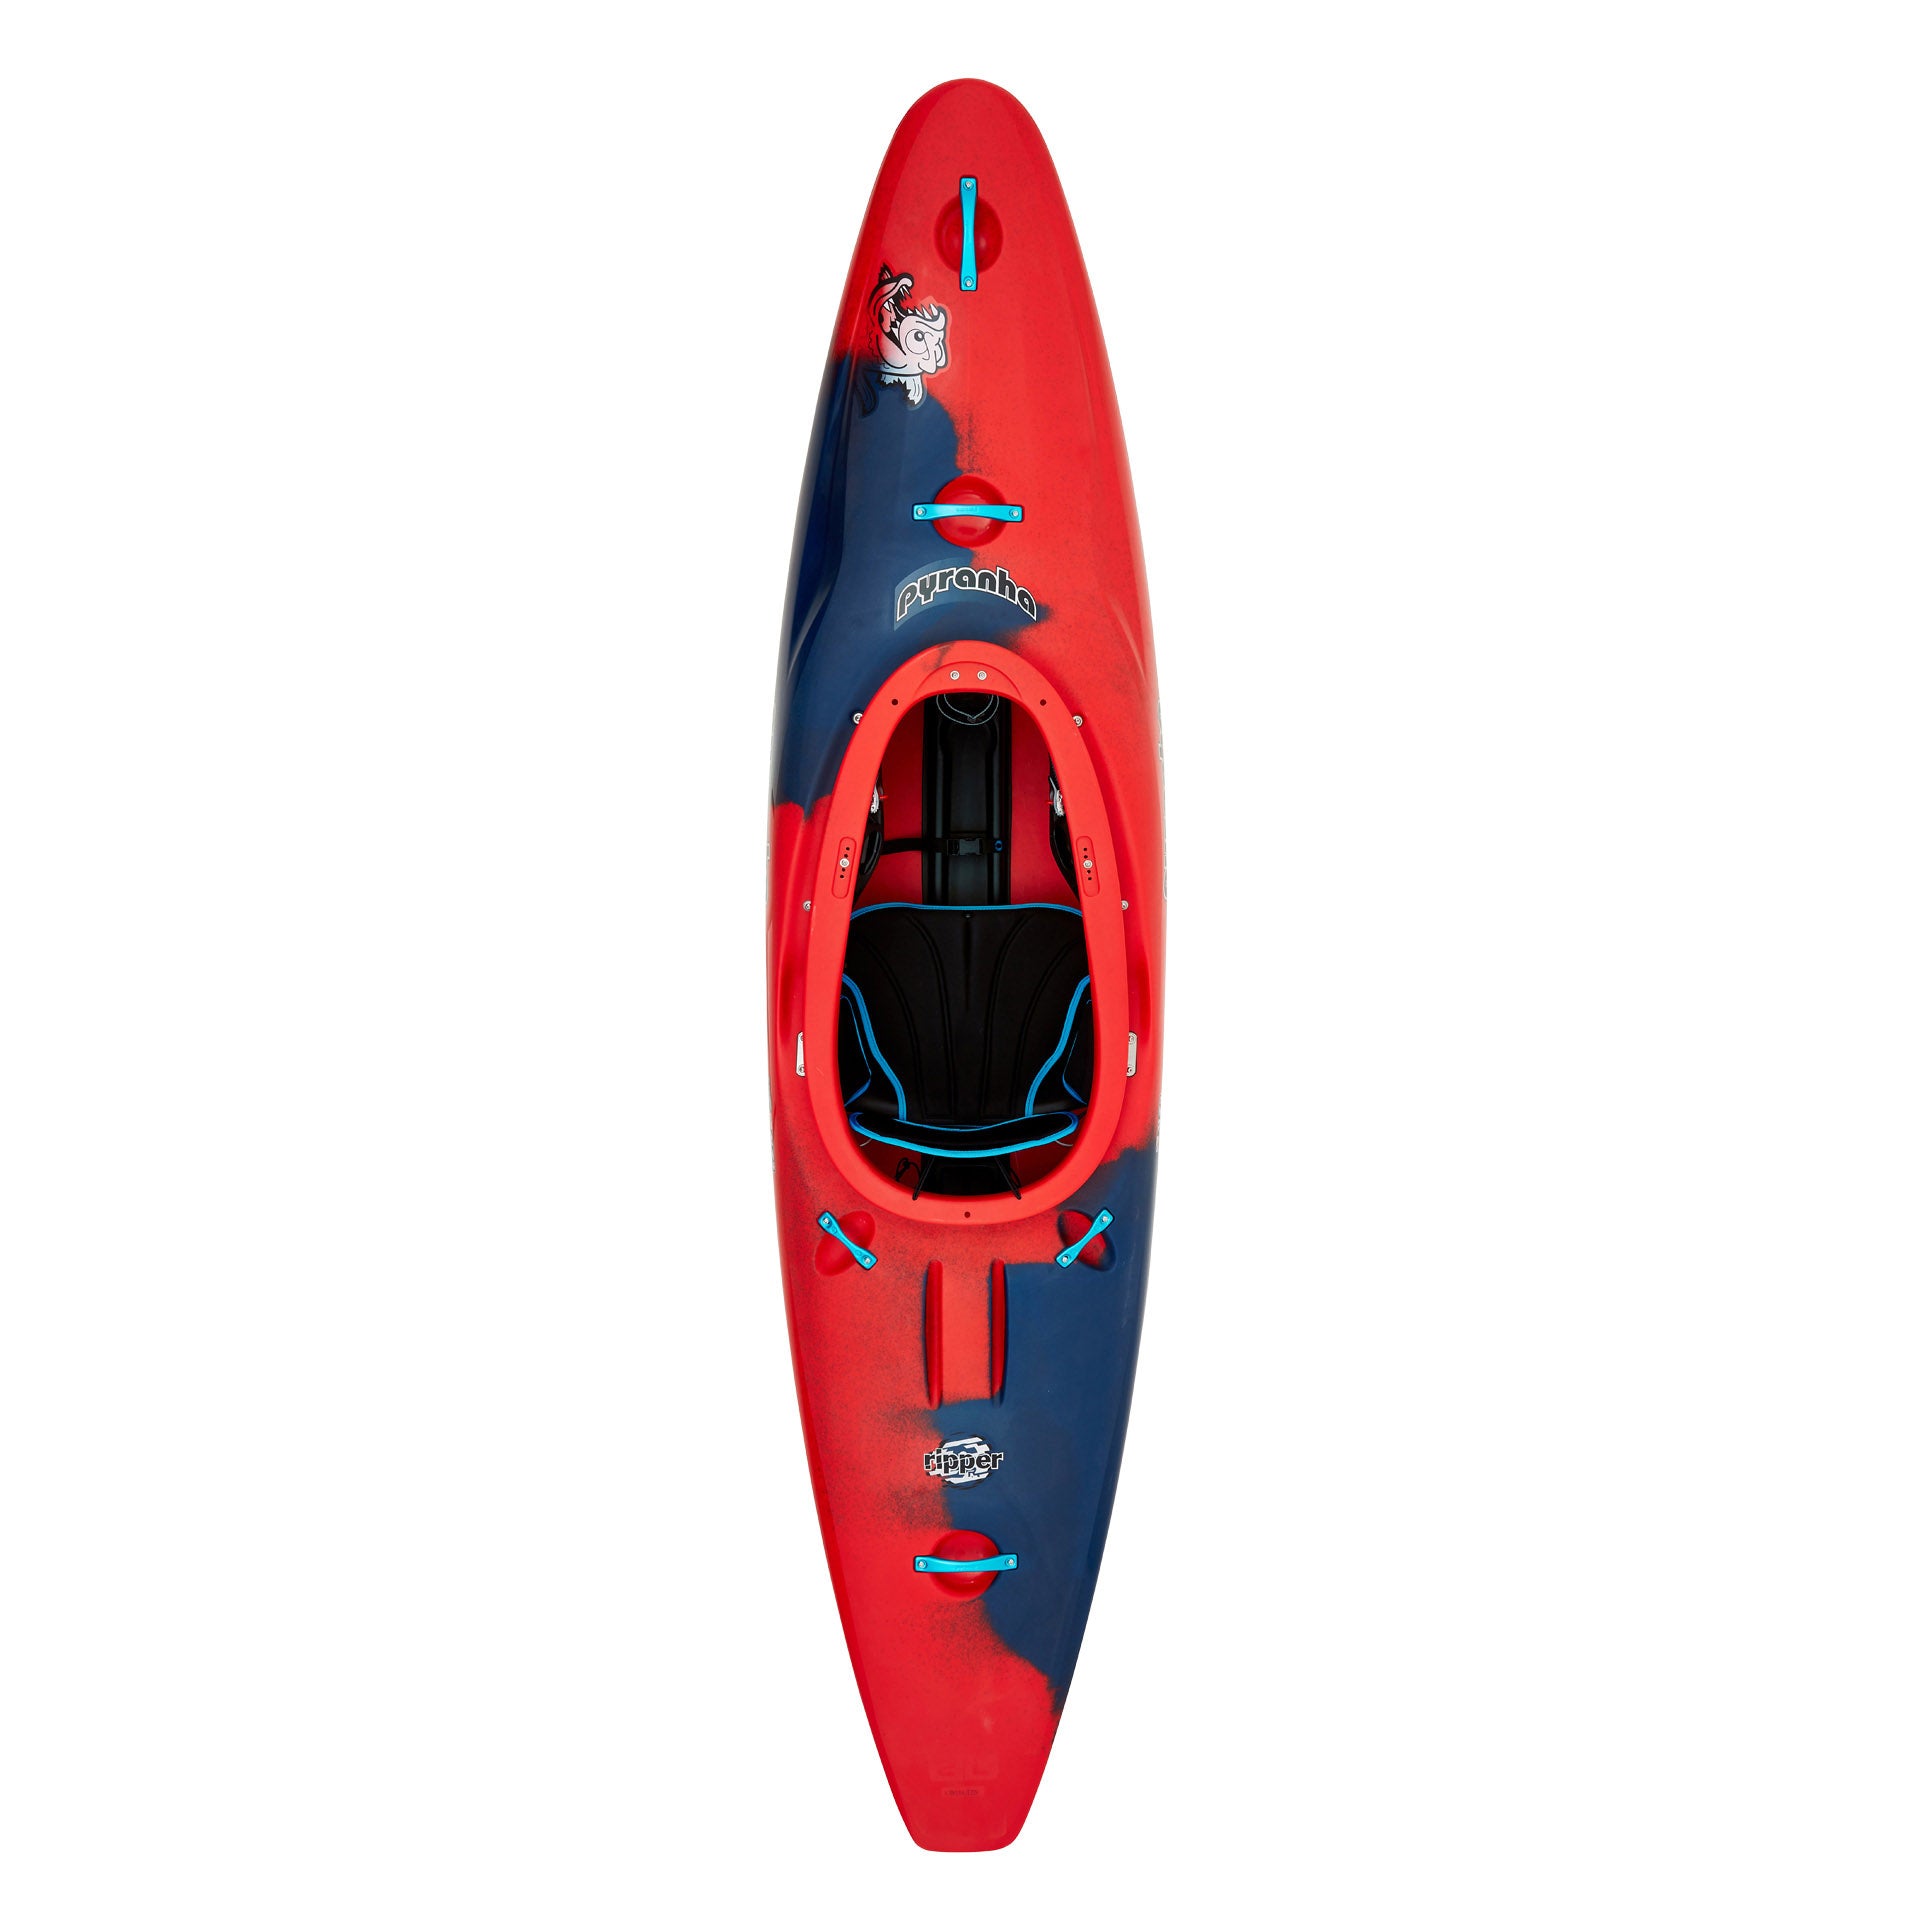 A red Pyranha Ripper 2 kayak with rocker on a white background.